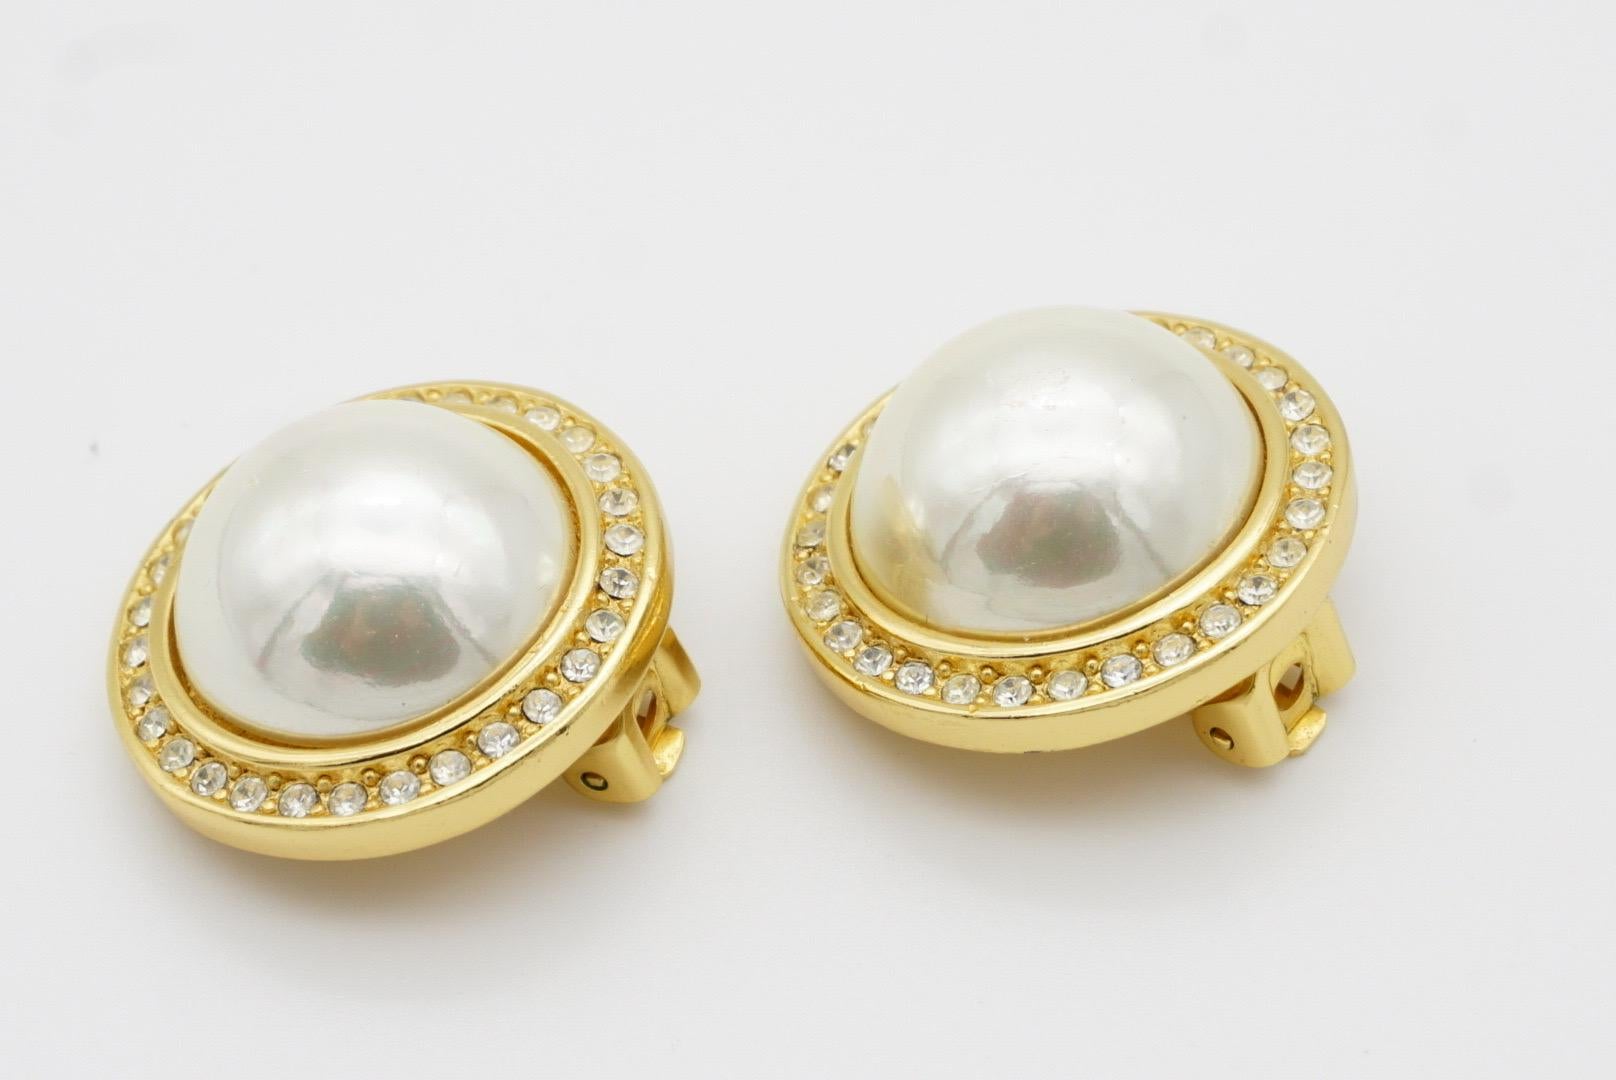 Christian Dior GROSSE 1990 CHC Large Round White Pearl Crystals Clip Earrings For Sale 5